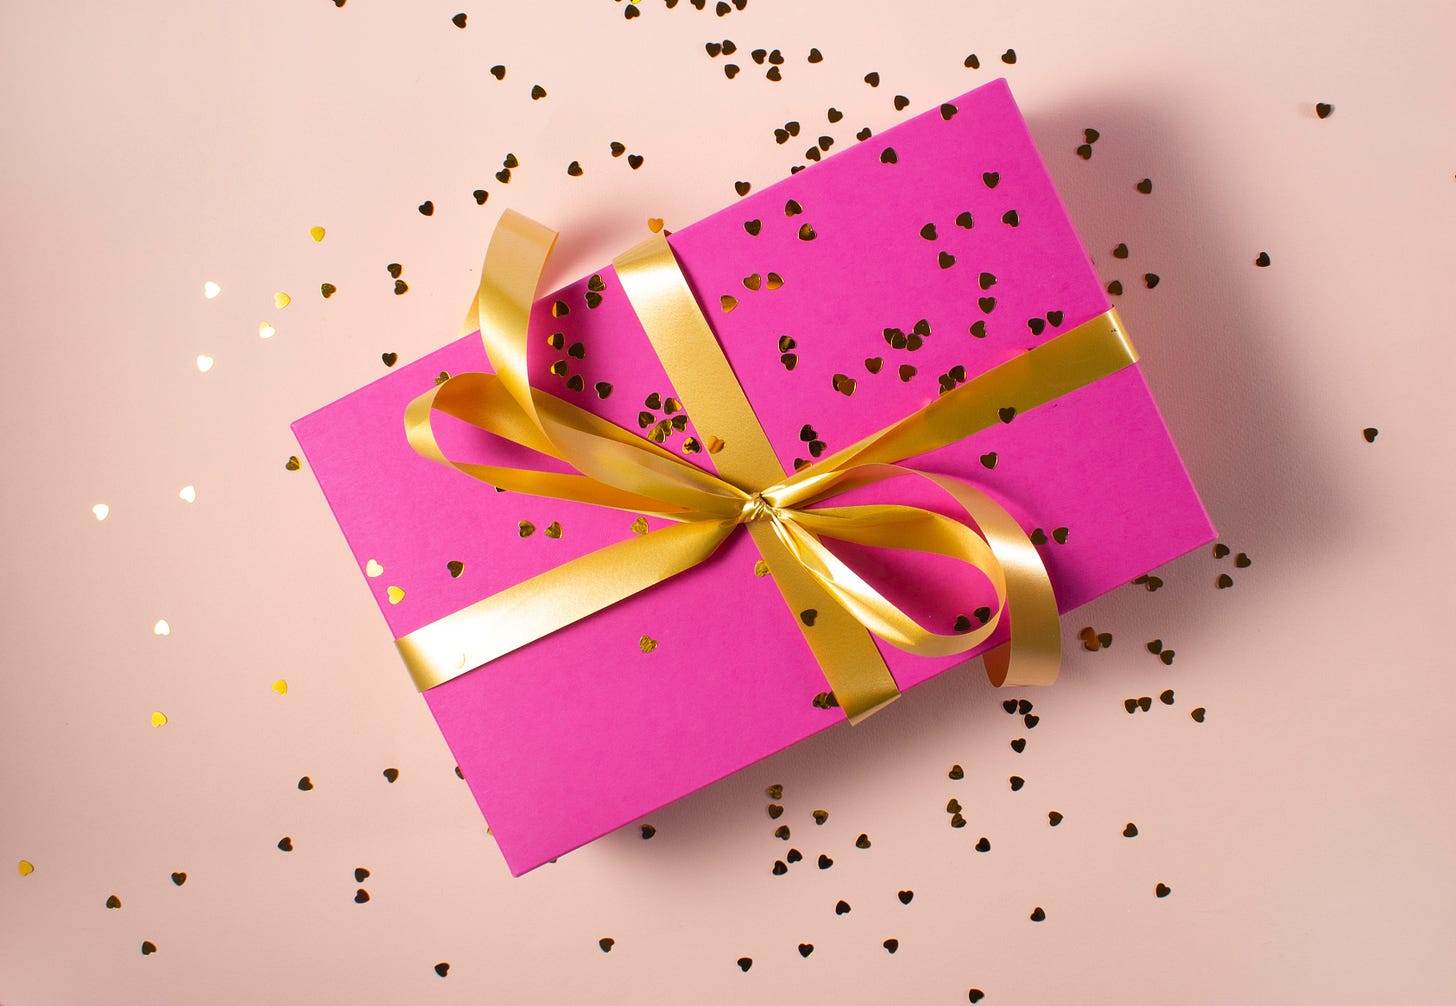 A bright pink gift box with gold ribbon and sprinkled with gold heart confetti